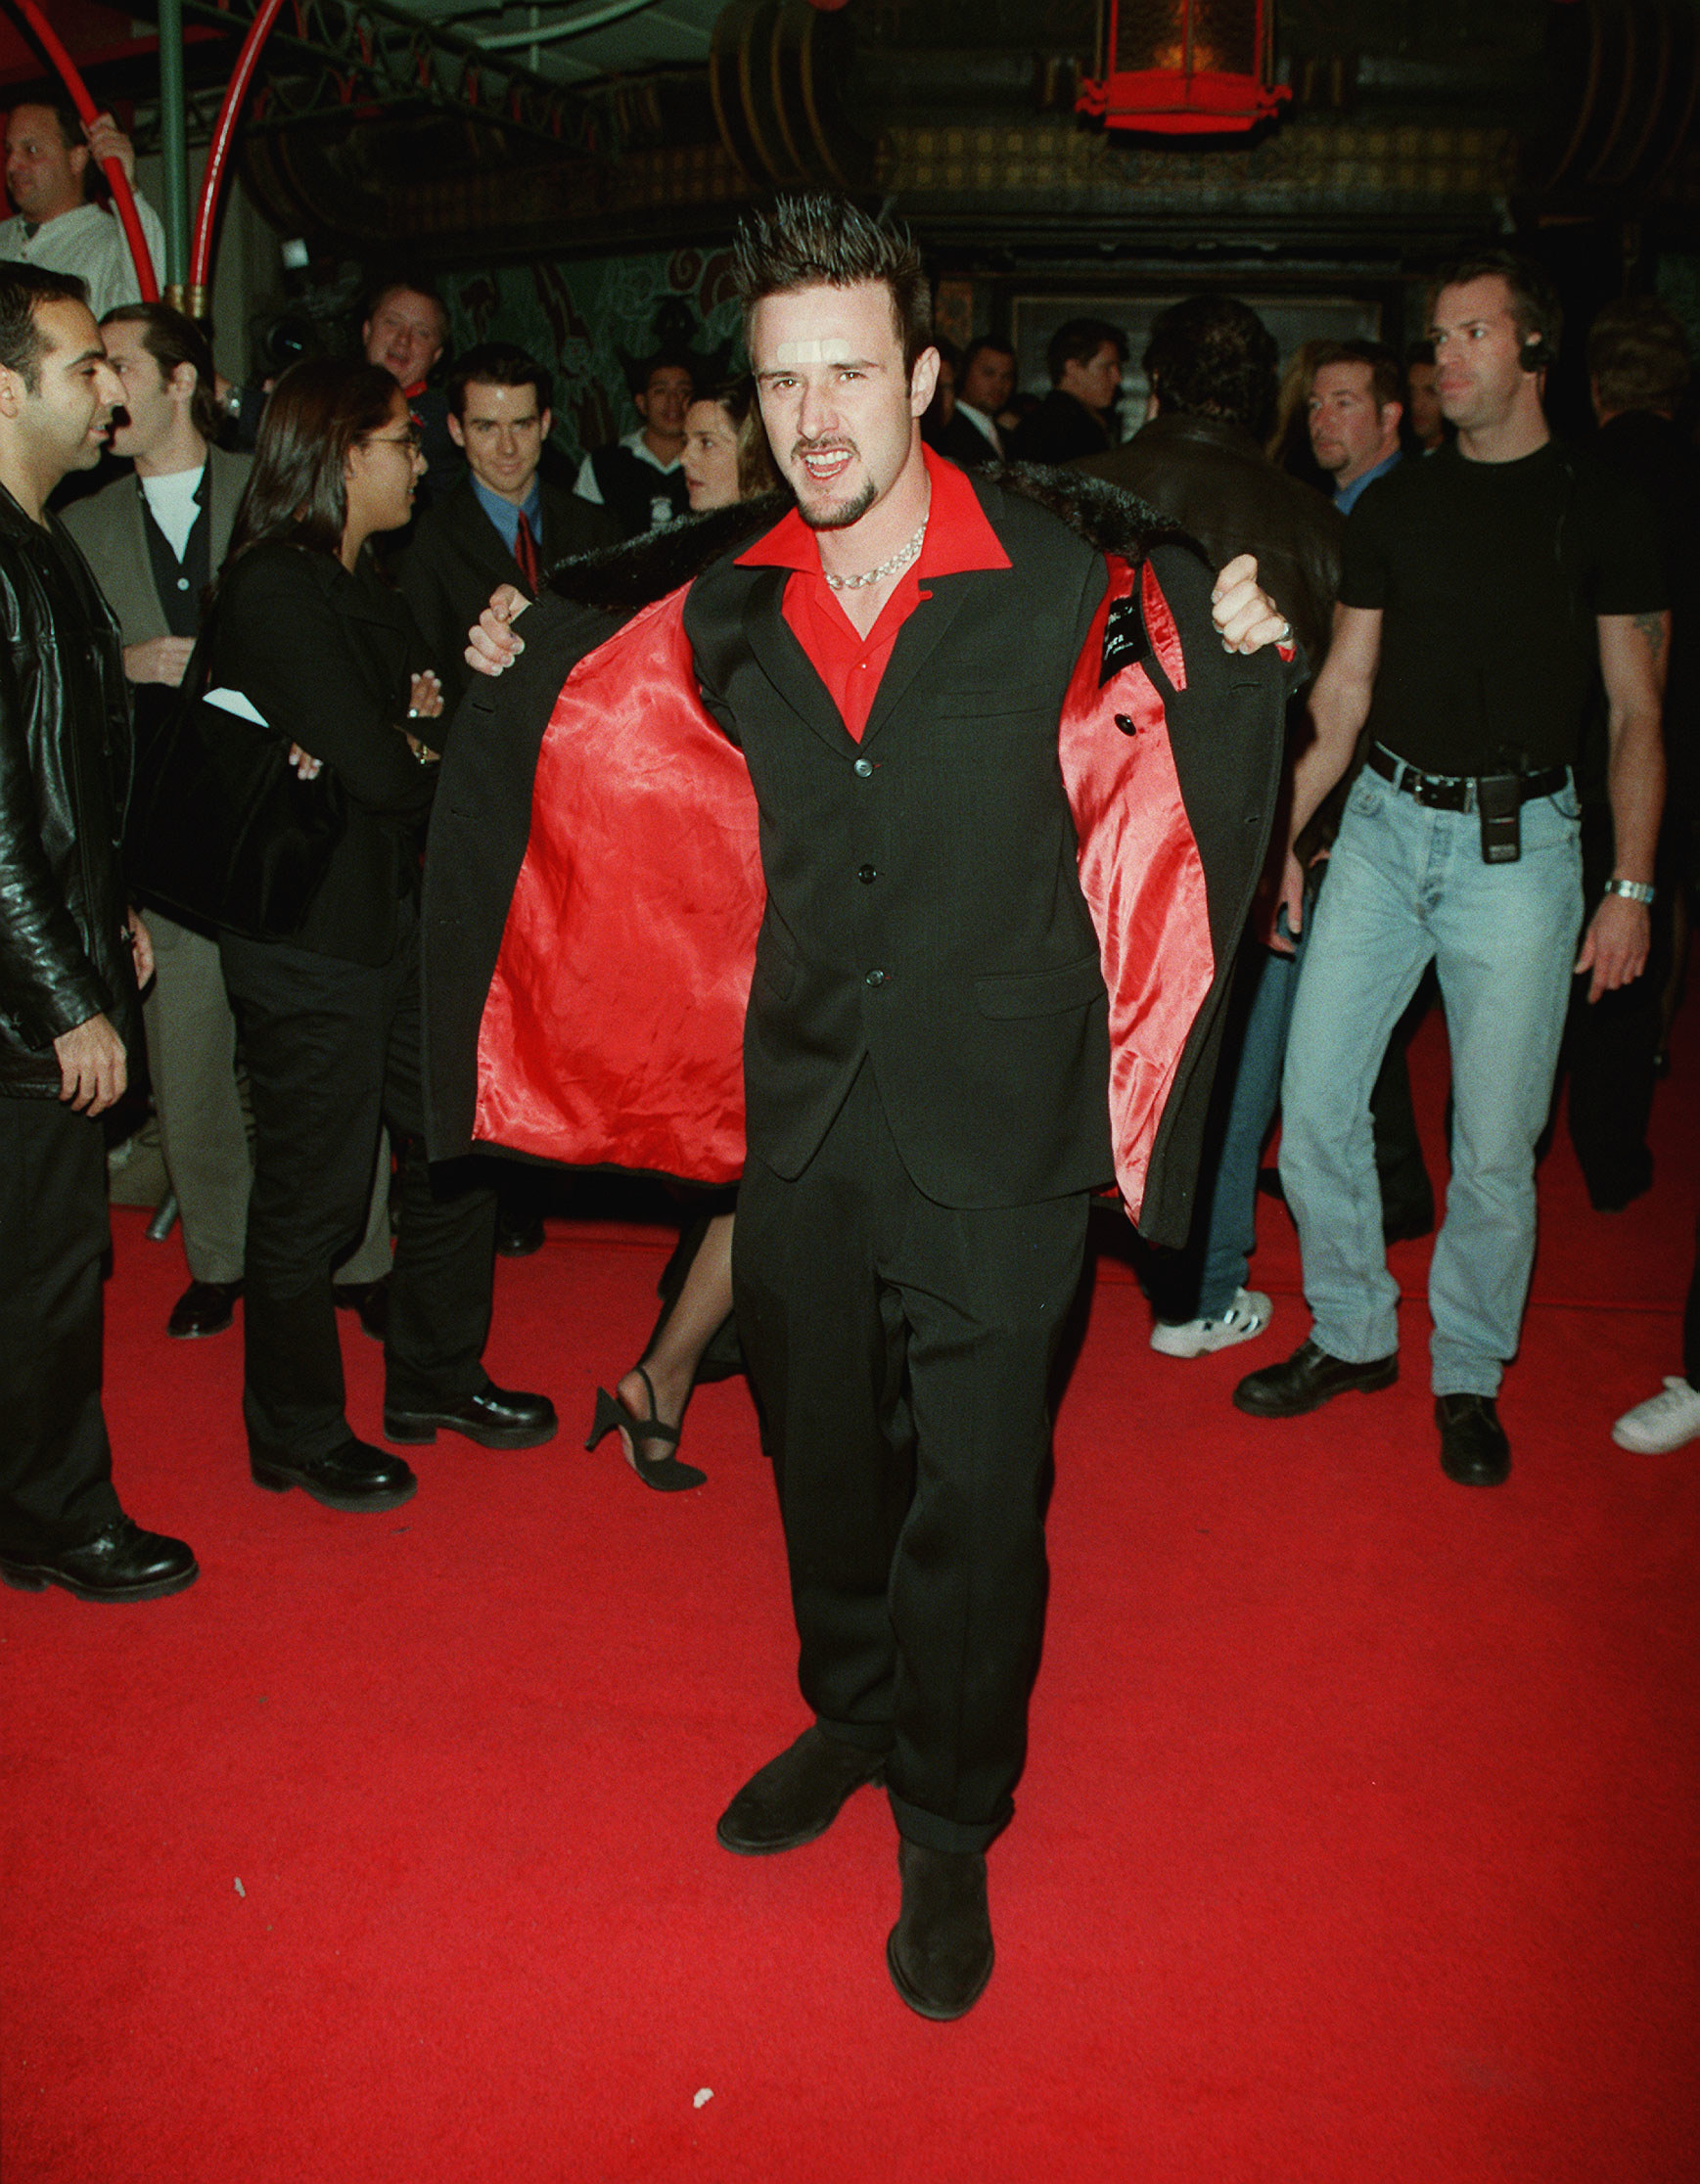 David Arquette in a black suit with a red collard shirt and a Band-Aid on his head